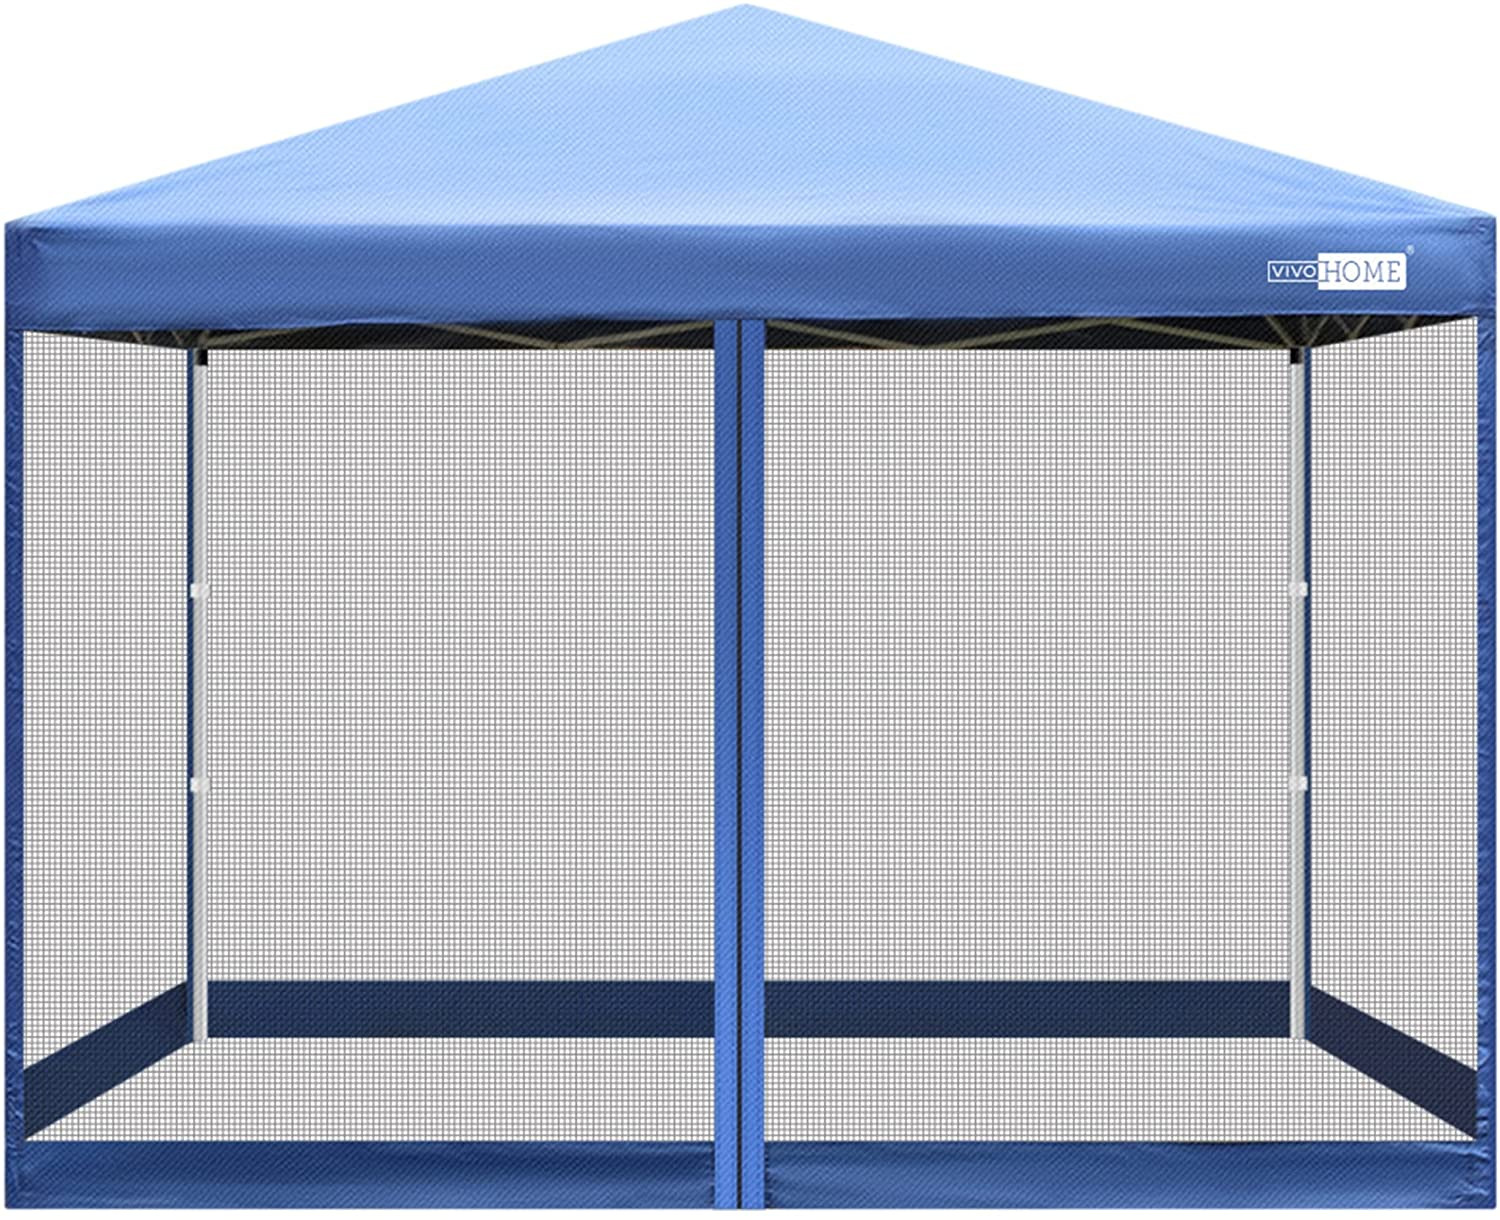 210D Oxford Outdoor Easy Pop up Canopy Screen Party Tent with Mesh Side Walls Bl